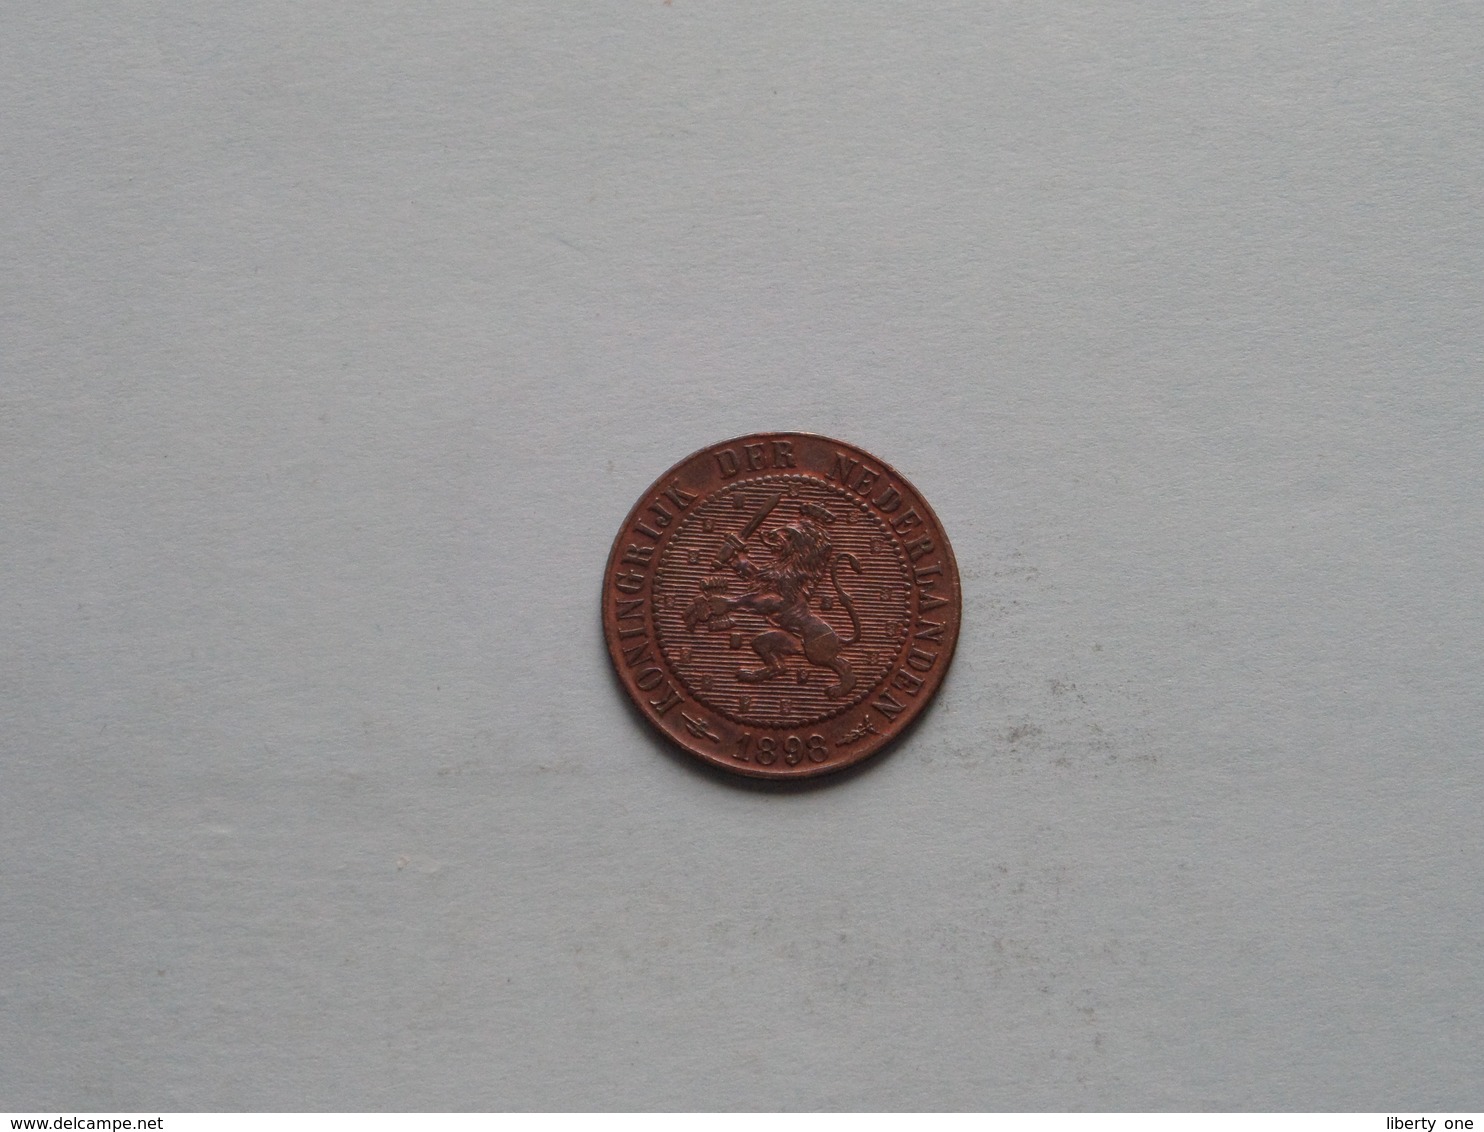 1898 - 2 1/2 Cent / KM 108.2 ( KONINGRIJK ) ( Uncleaned Coin - For Grade, Please See Photo ) ! - 2.5 Cent